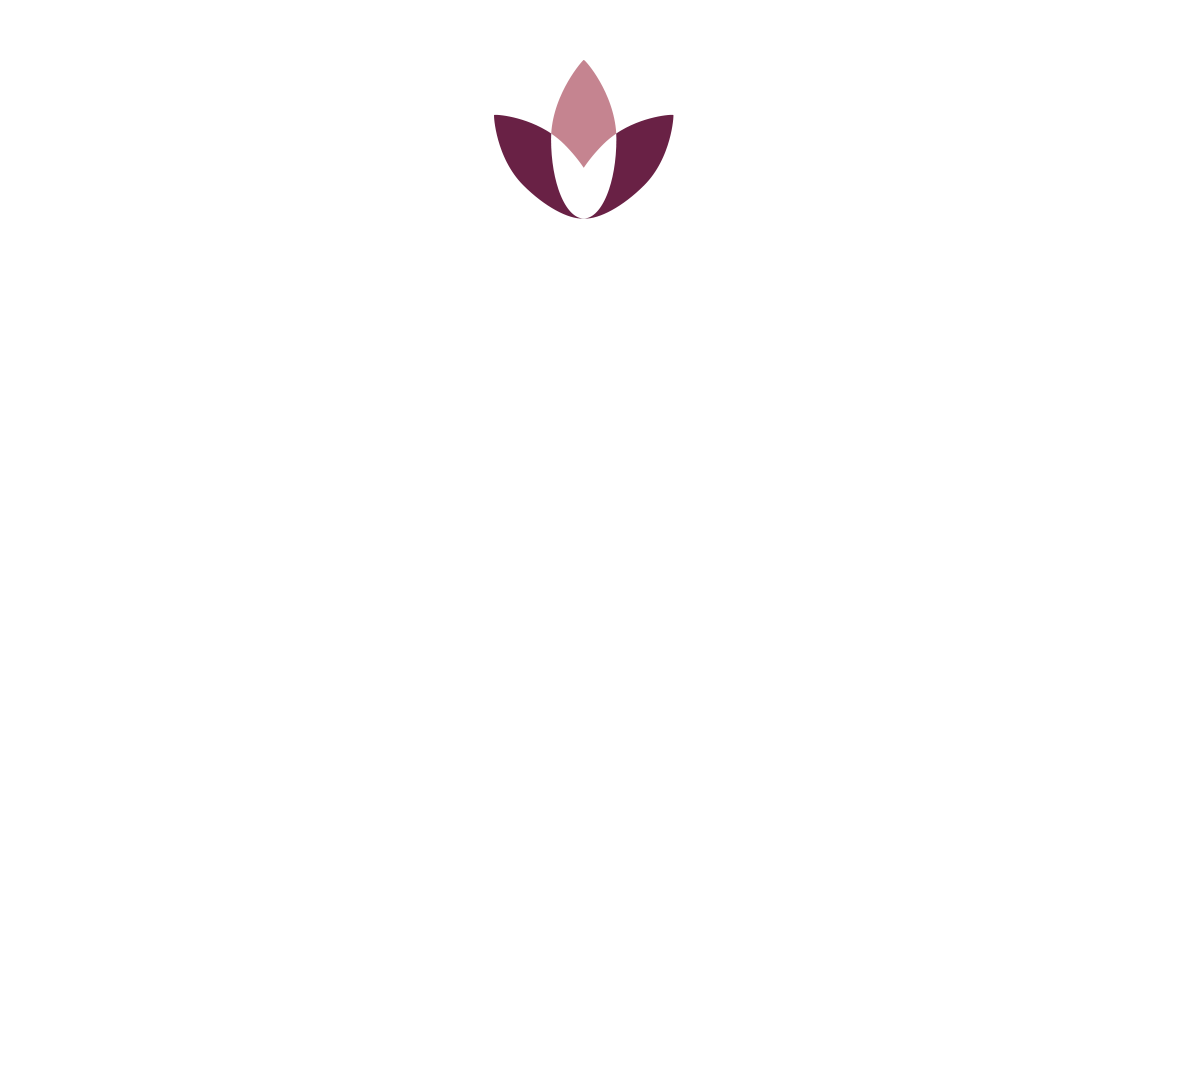 Dimensional Being online yoga series logo by Nadi in white.